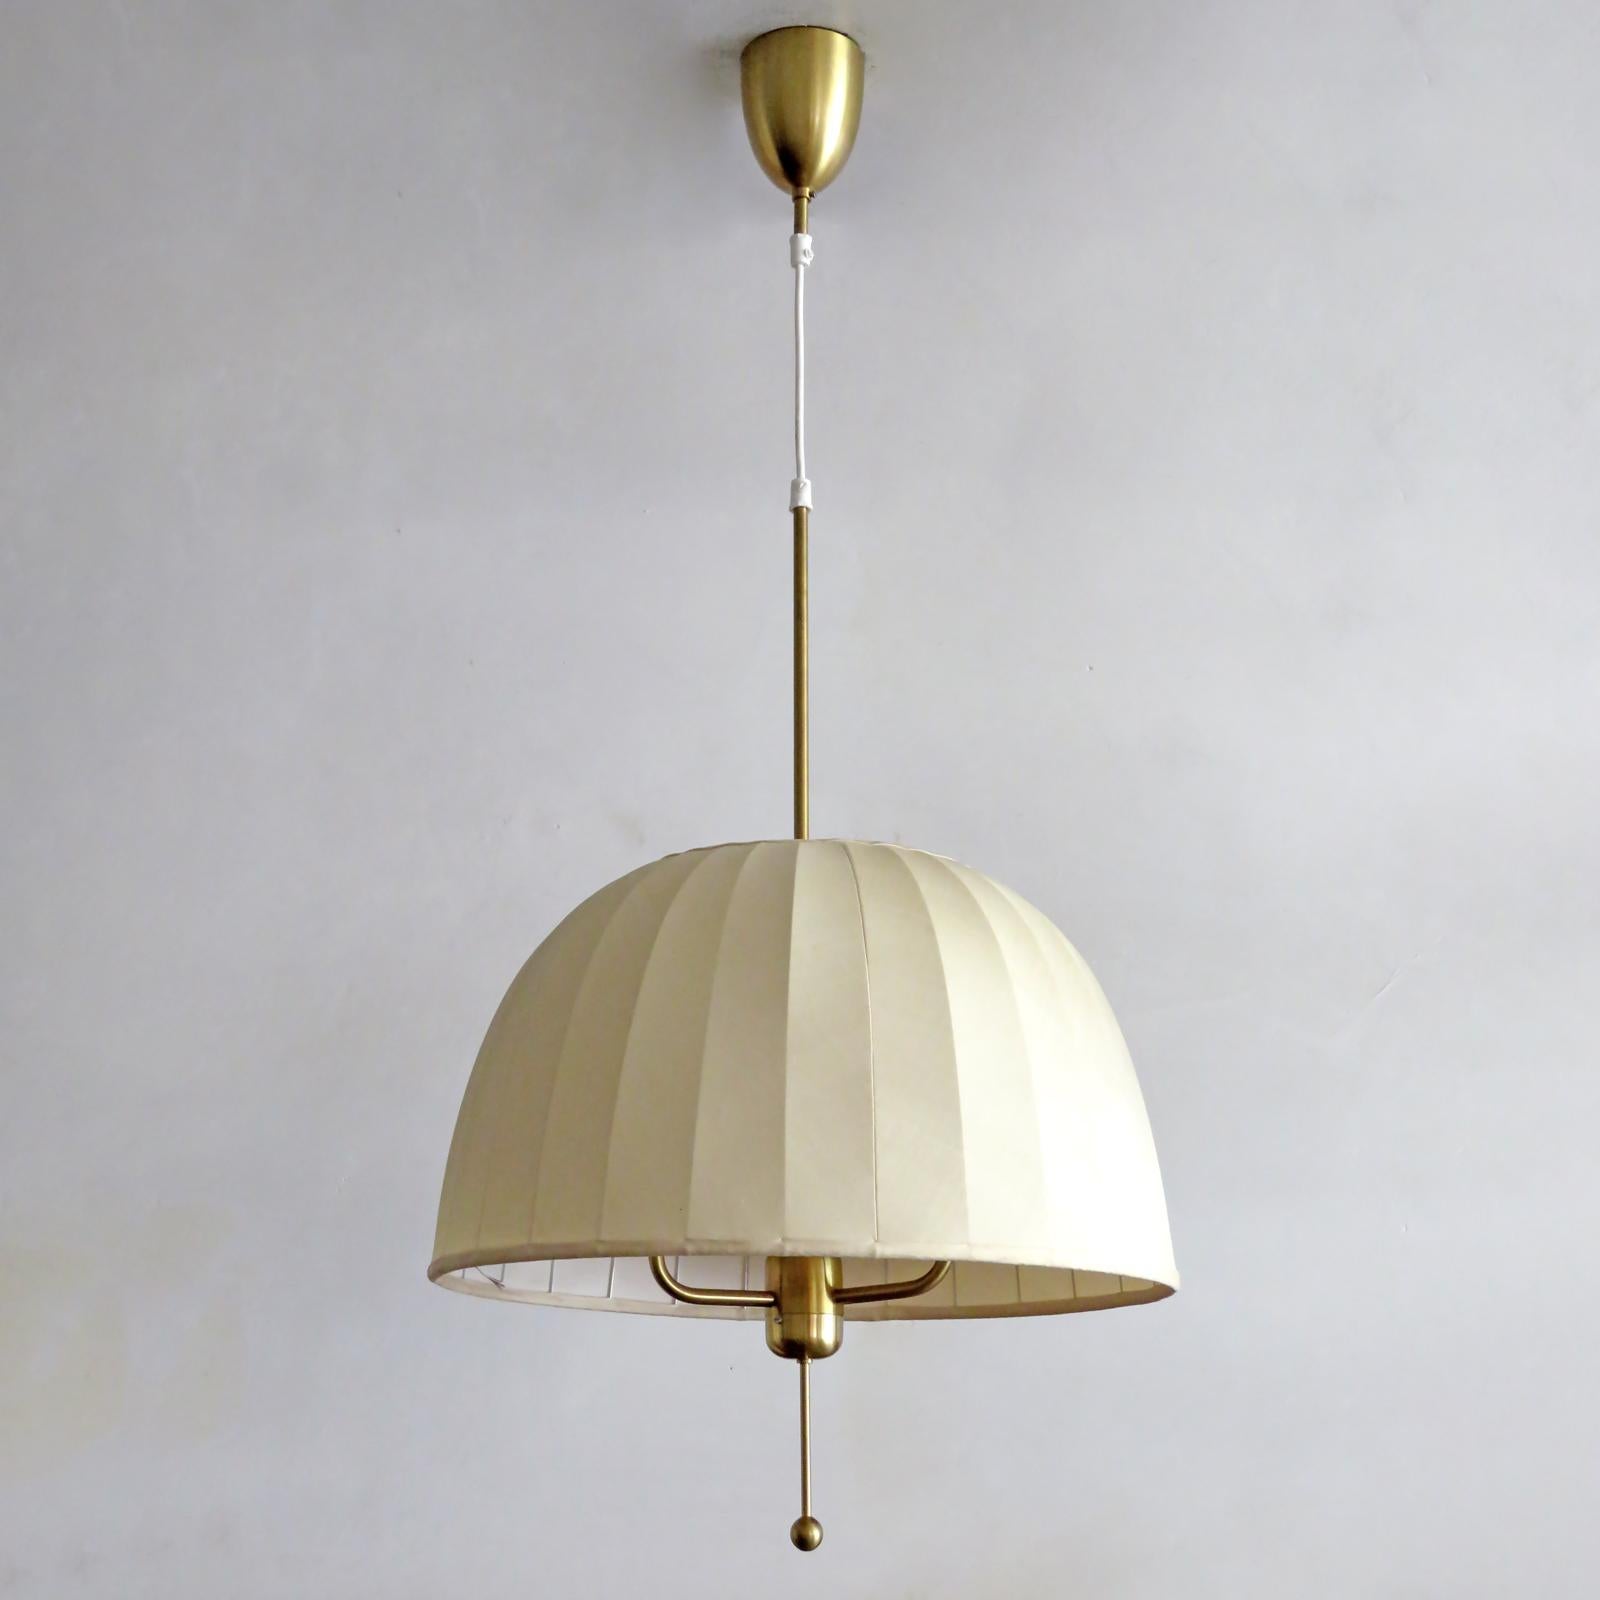 Wonderful pendant lamp 'Carolin' model T549/3 designed by Hans-Agne Jakobsson for Markaryd, Sweden, 1960, with brass frame covered by a fabric shade, with original brass canopy. The overall drop as well as the vertical position of the shade is